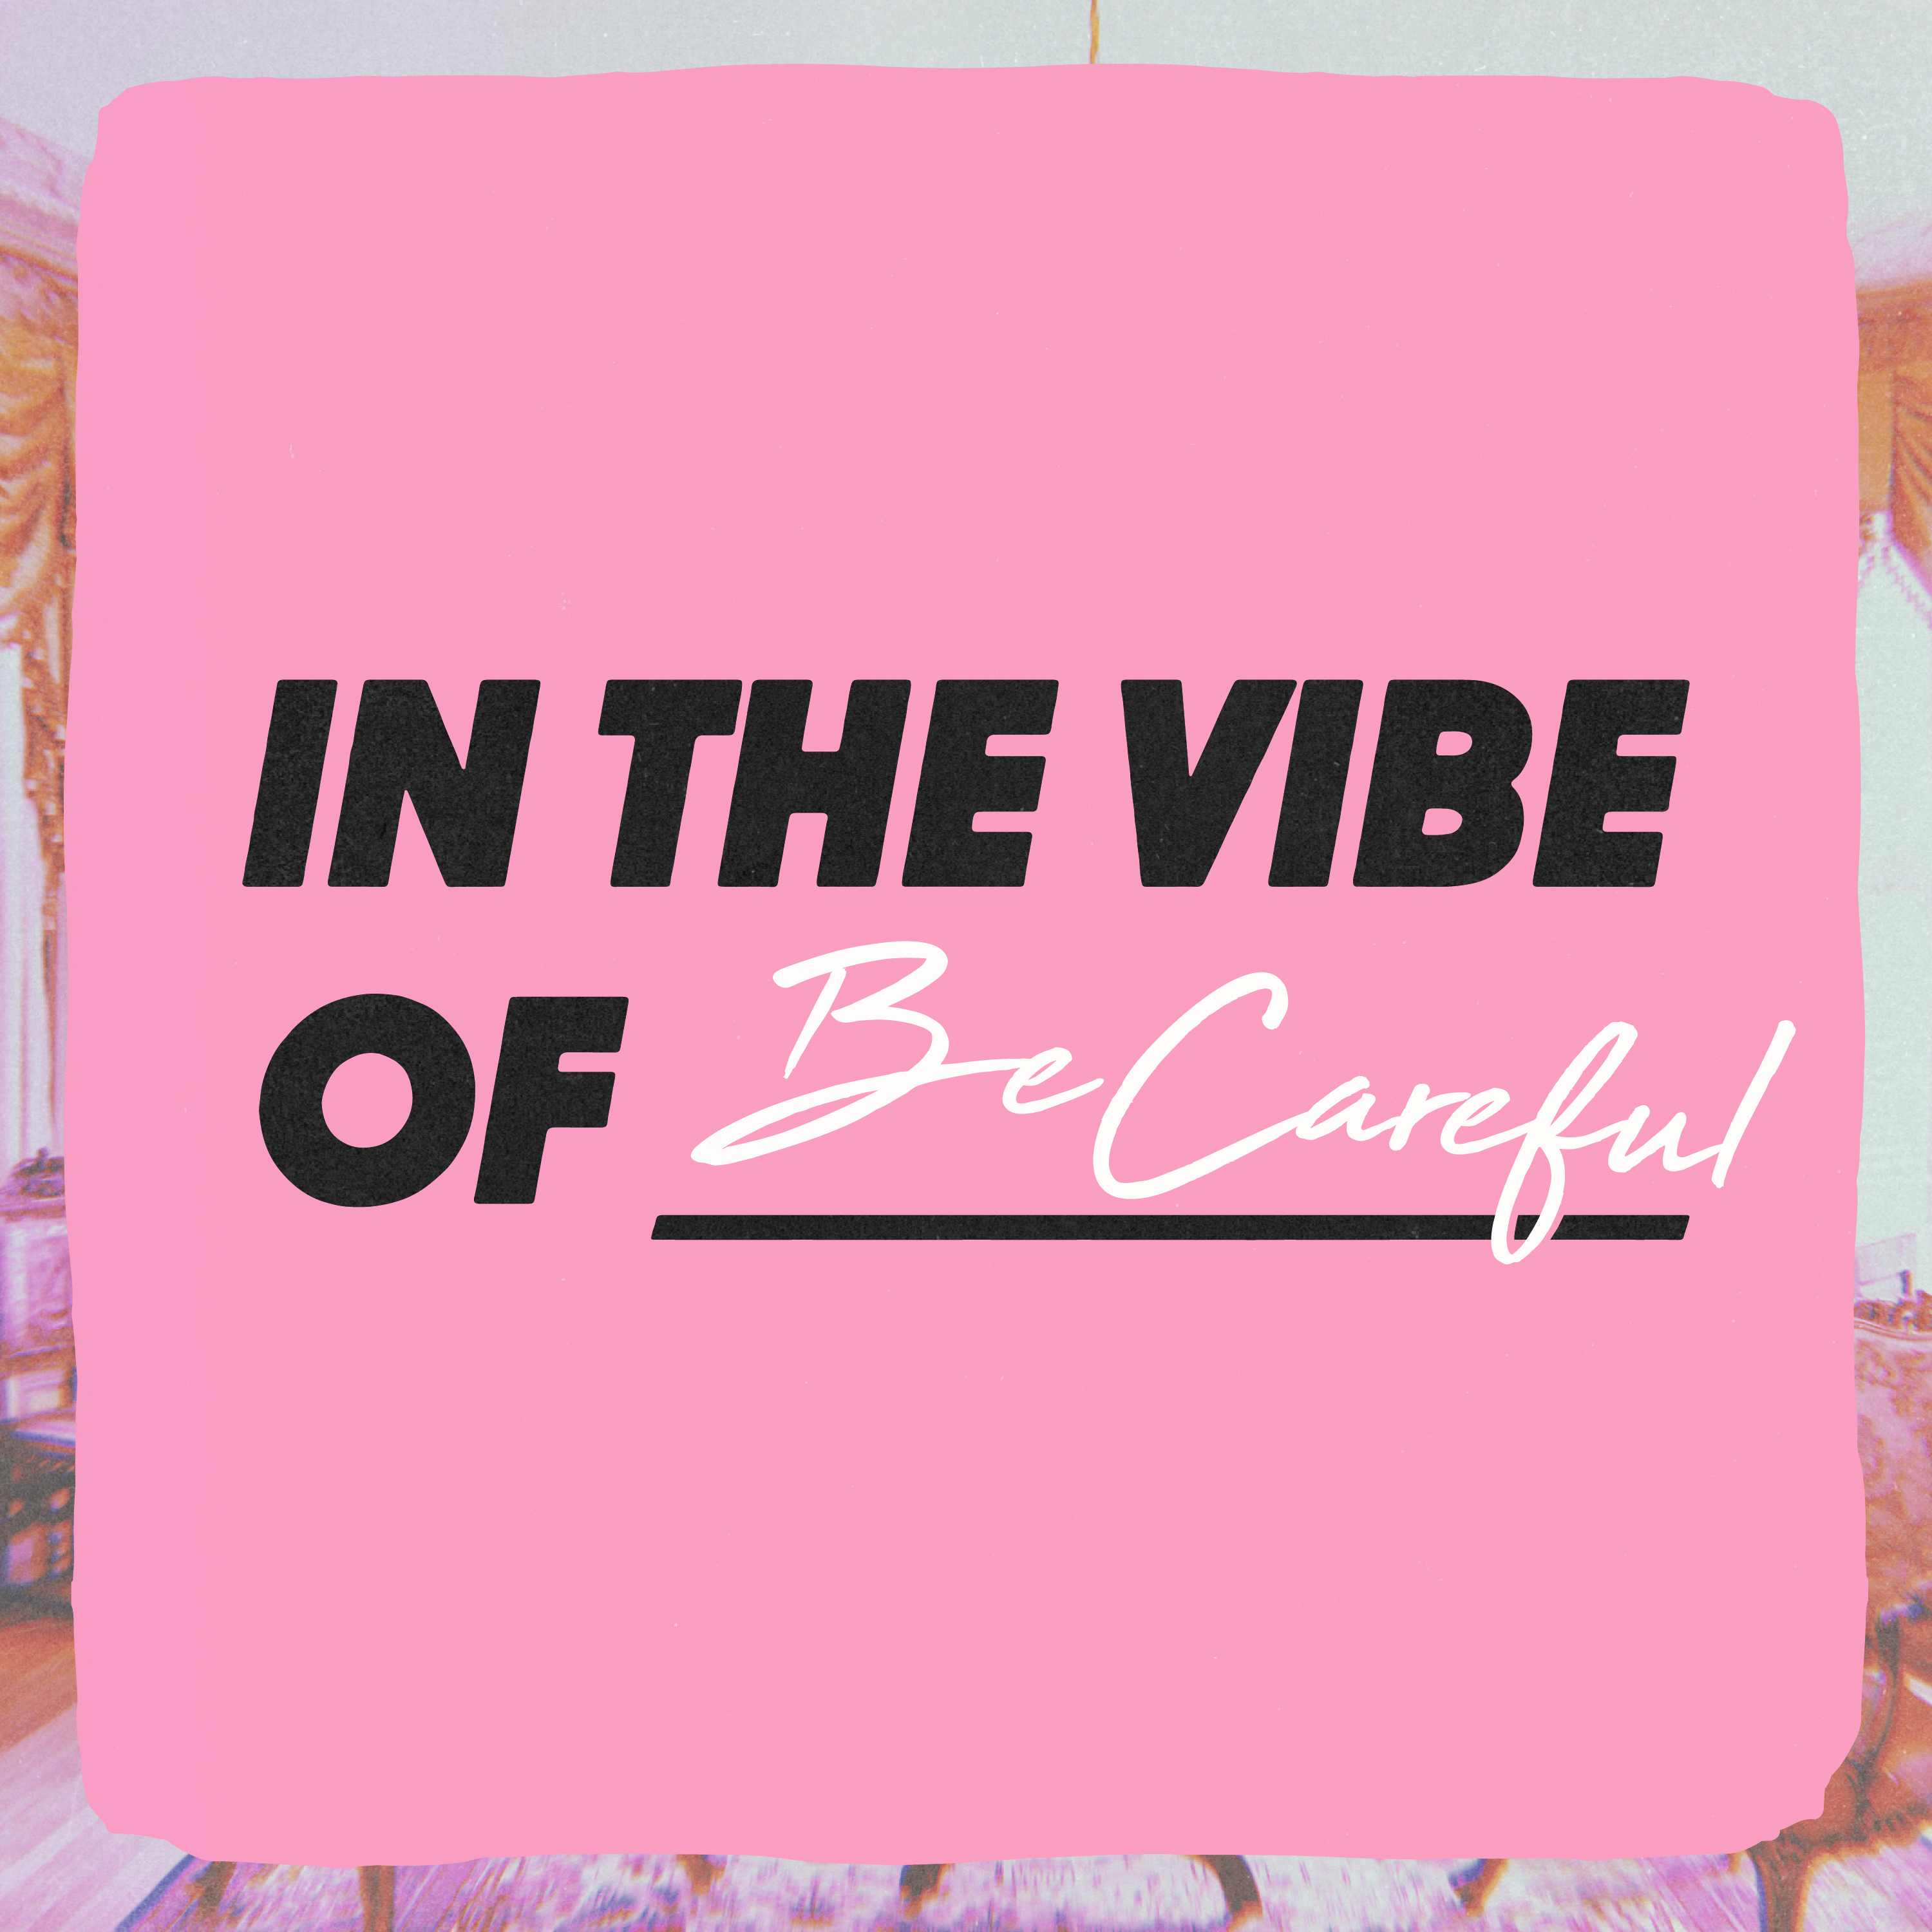 In The Vibe Of - Be Careful